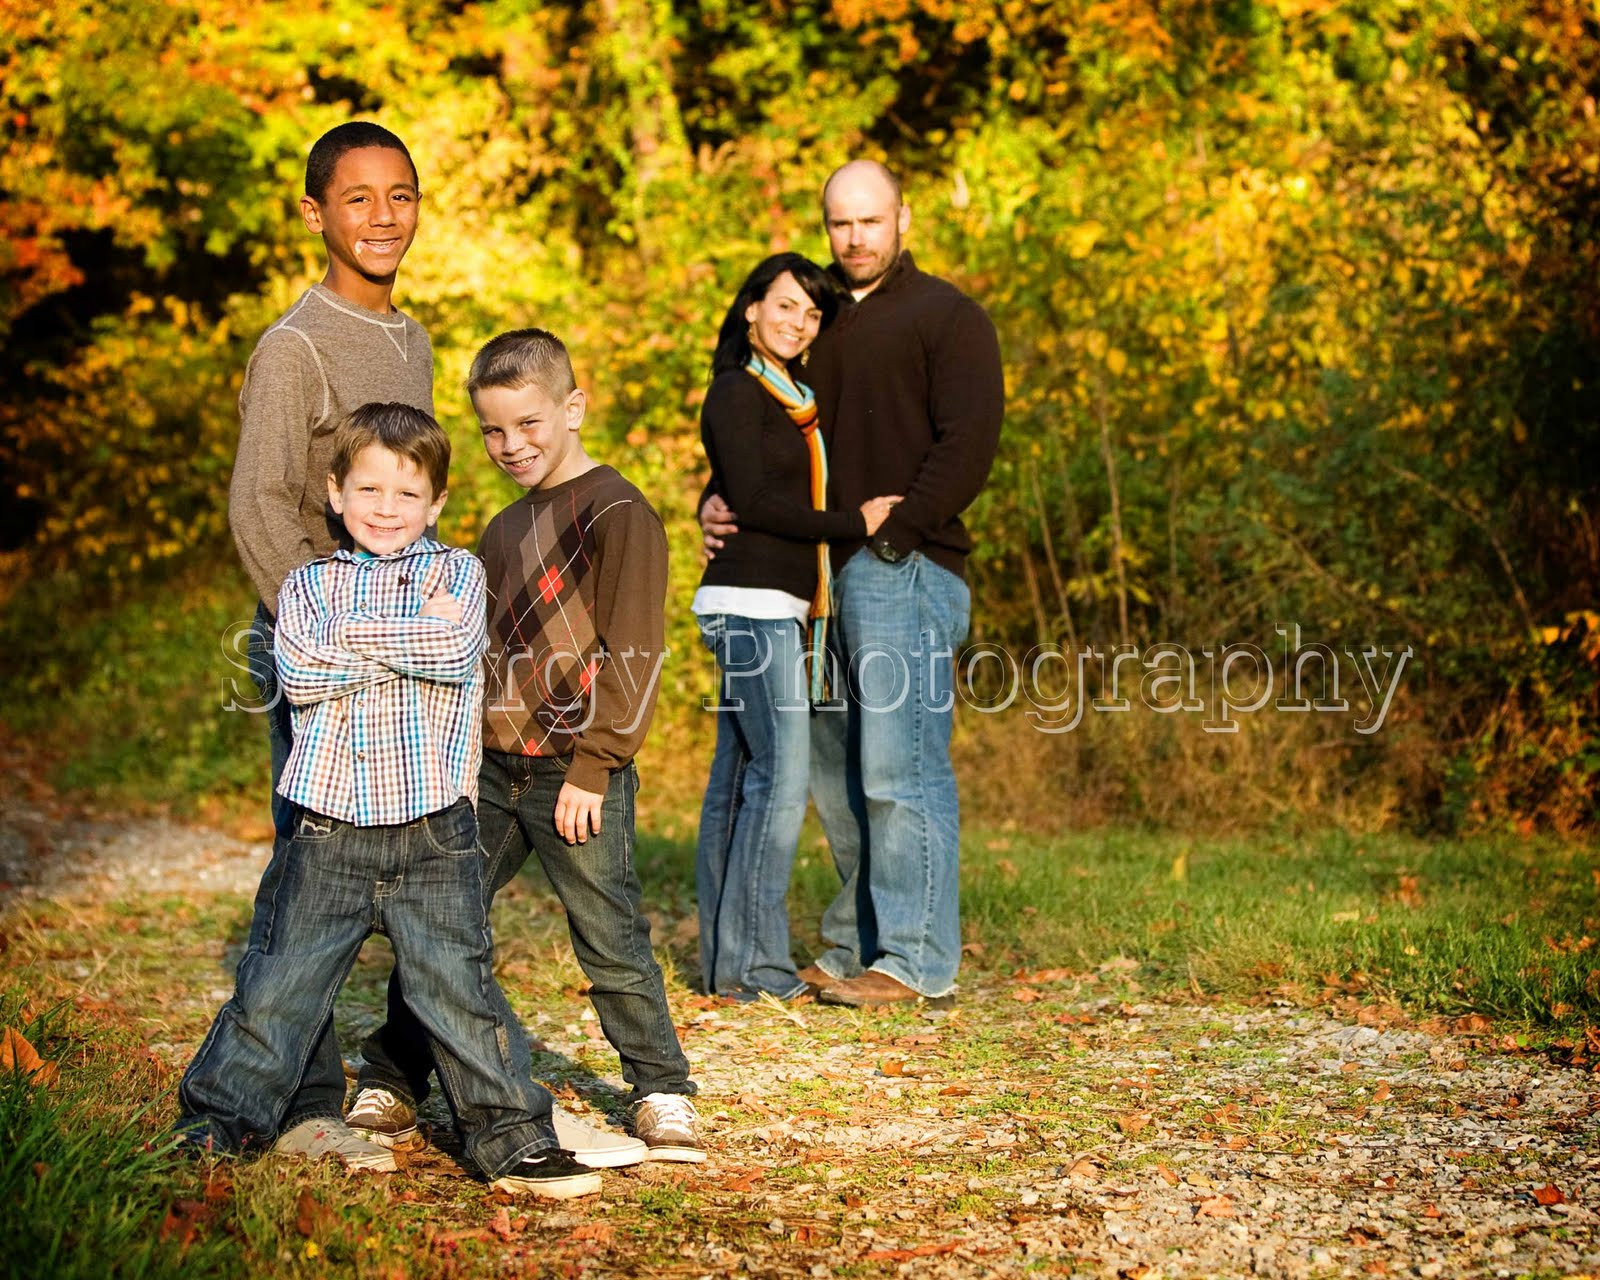 Family Portrait Ideas For Fall
 In True Color Fall Family Portraits